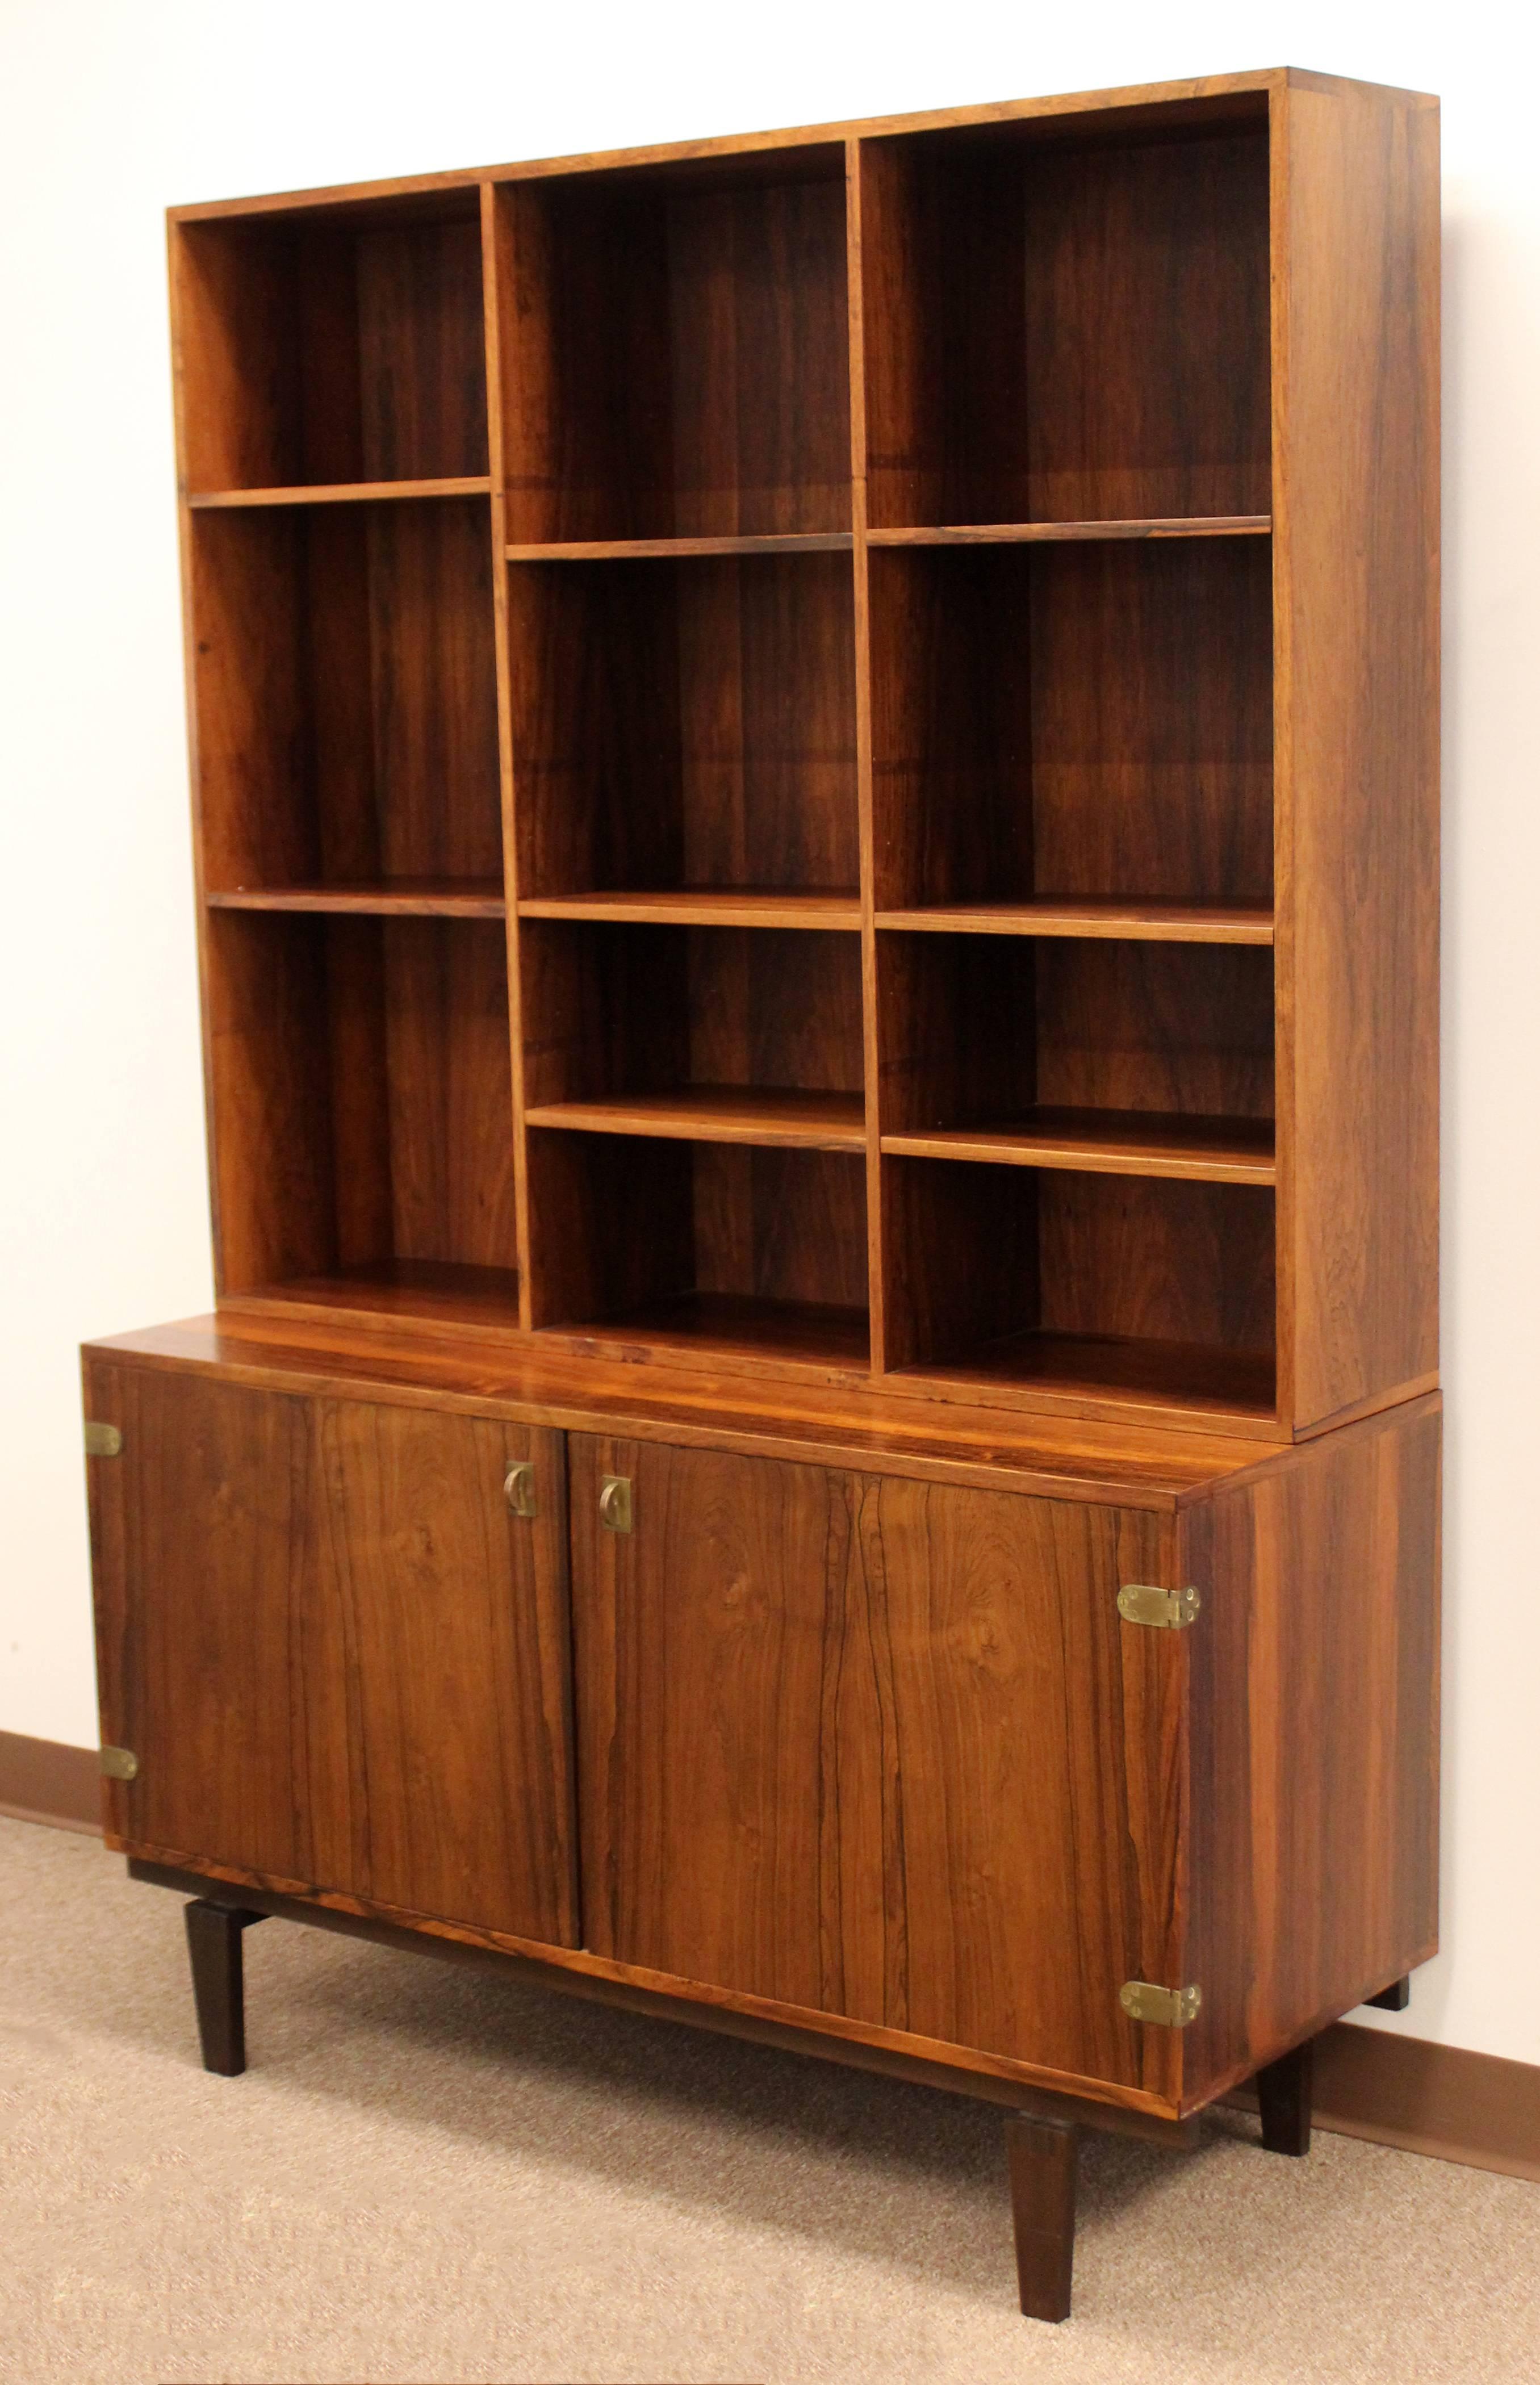 For your consideration is a marvelous, rosewood and brass, bookcase credenza by Peter Lovig for Danish furniture company Hedensted Mobelfabrik, circa 1960s. Matching secretary credenza available in separate listing. Bookcase is in excellent